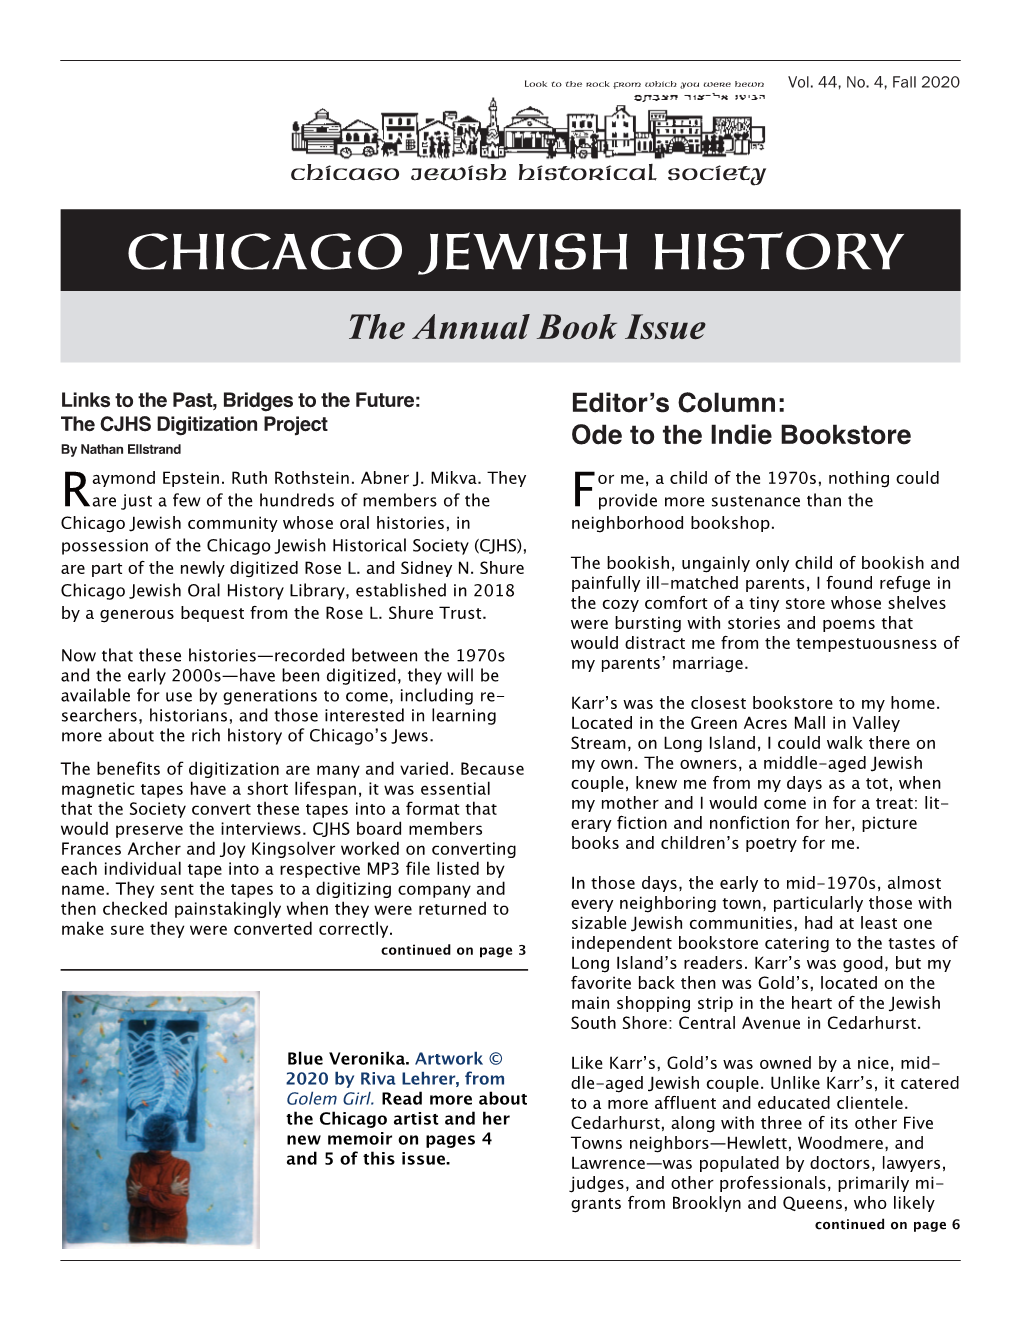 CHICAGO JEWISH HISTORY the Annual Book Issue